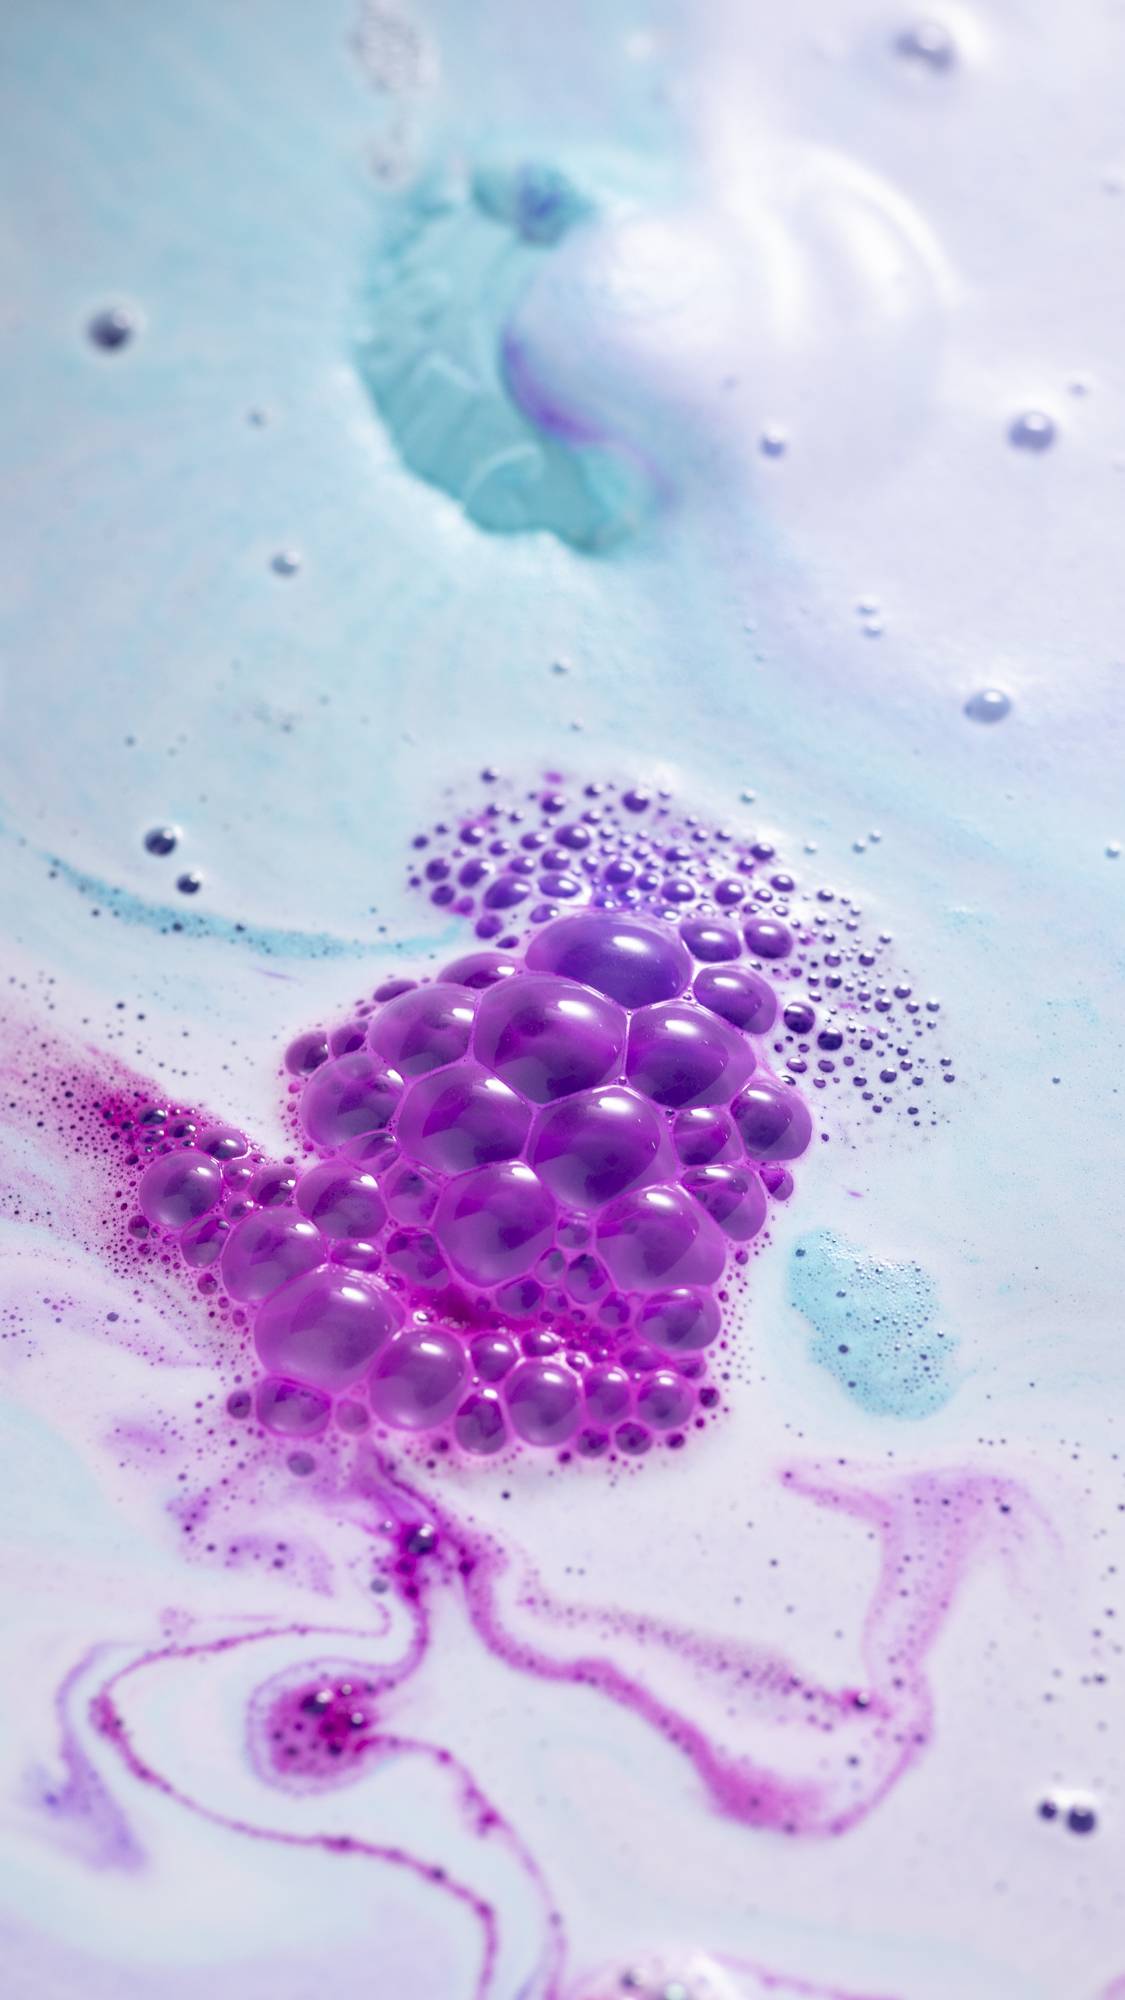 The bath bomb is dissolving in the bath water giving off delicate blue, foamy swirls and a pop of bright pink. 